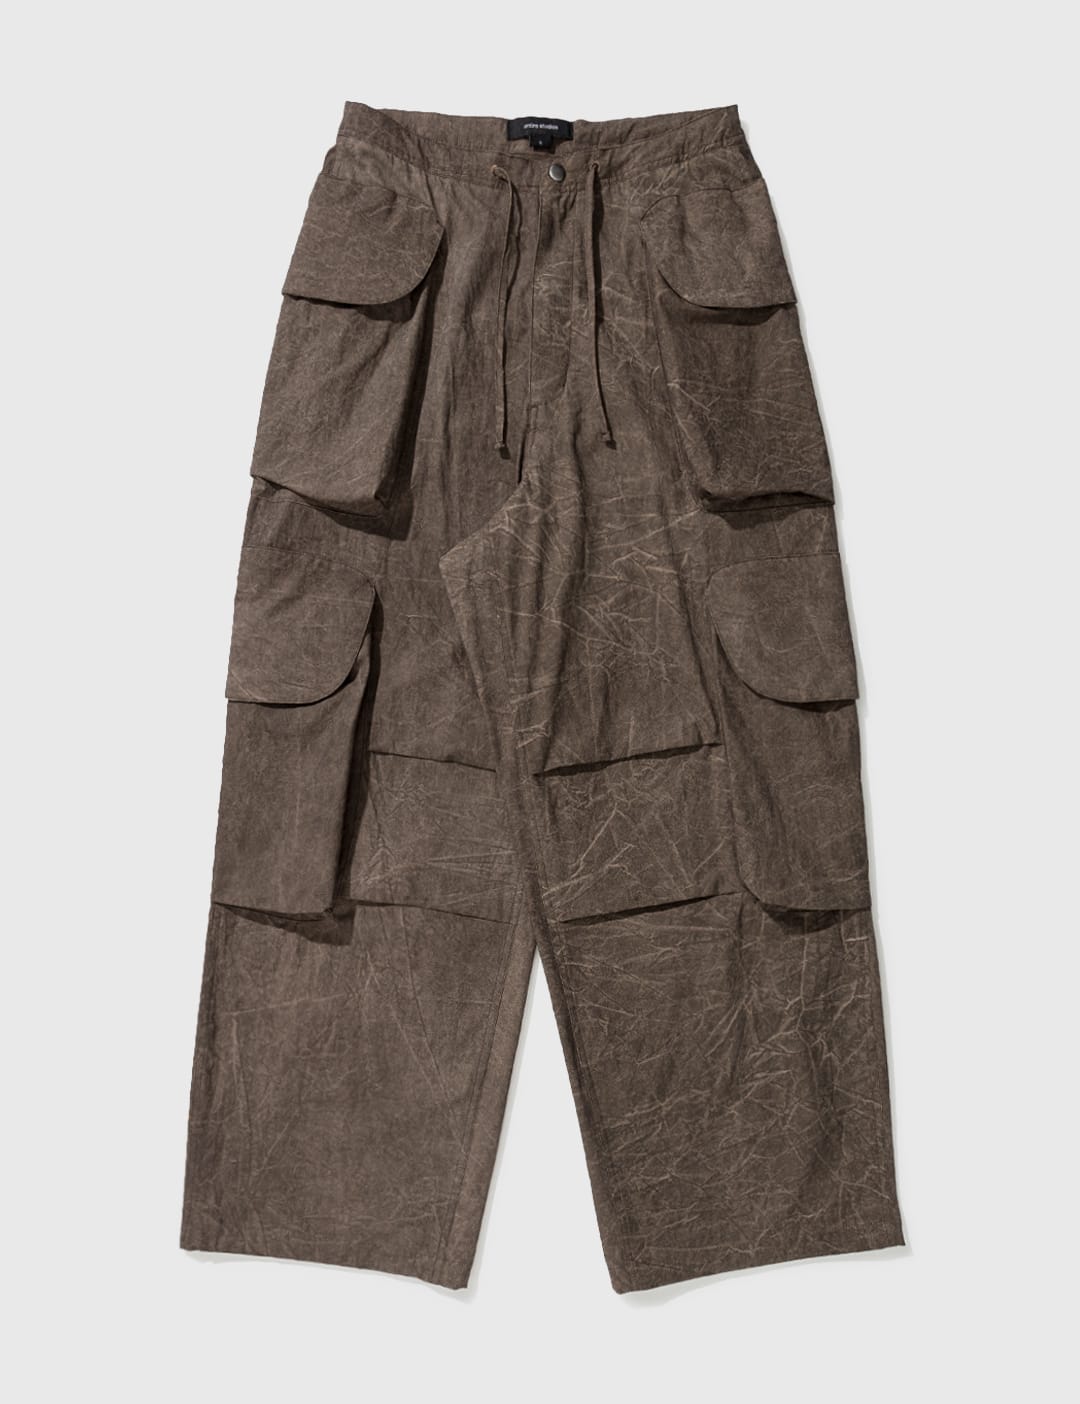 Entire Studios - GOCAR CARGO PANTS | HBX - Globally Curated